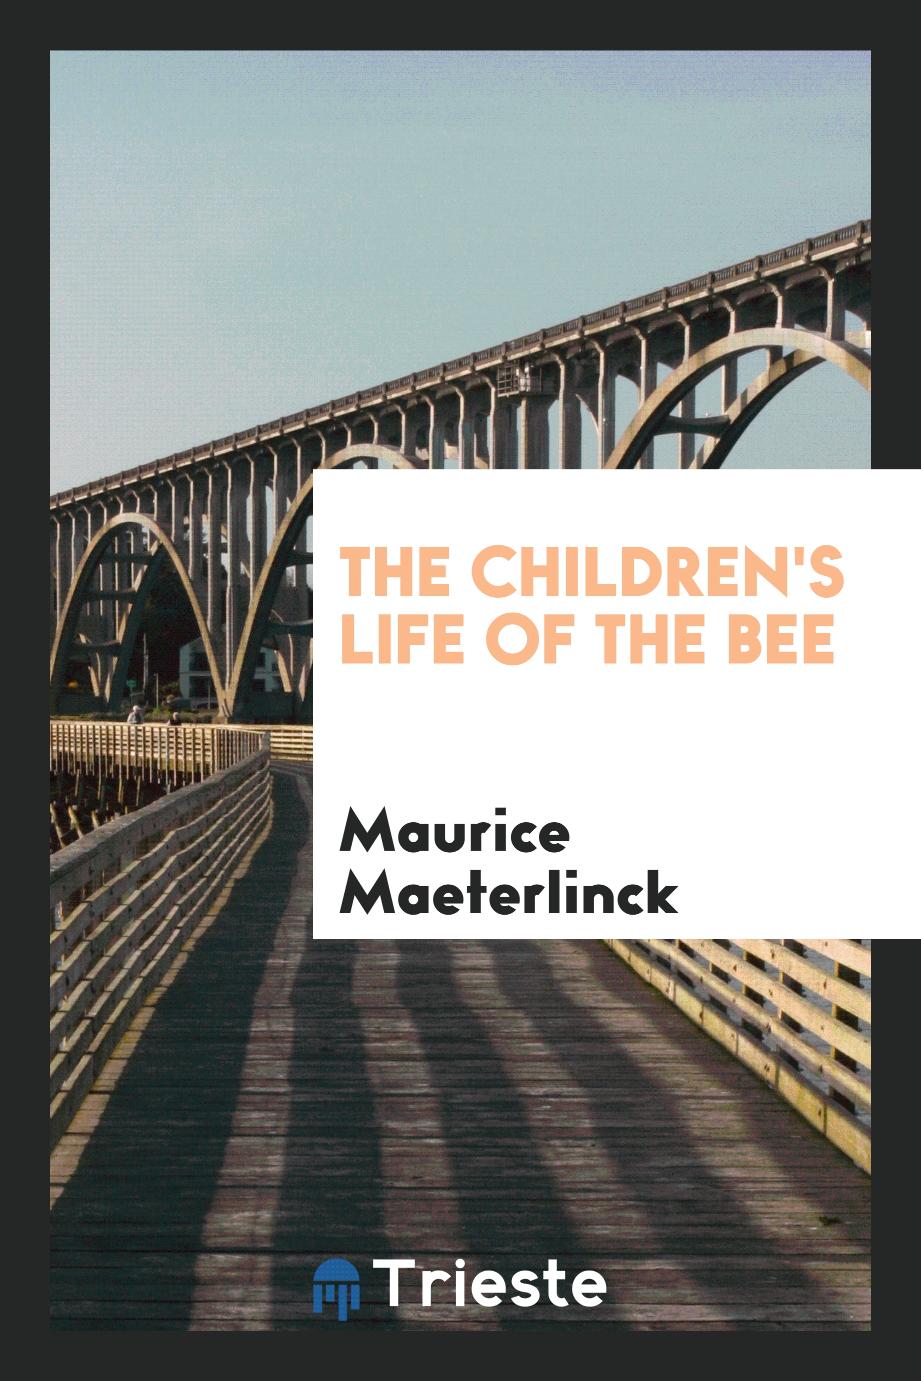 The children's Life of the bee